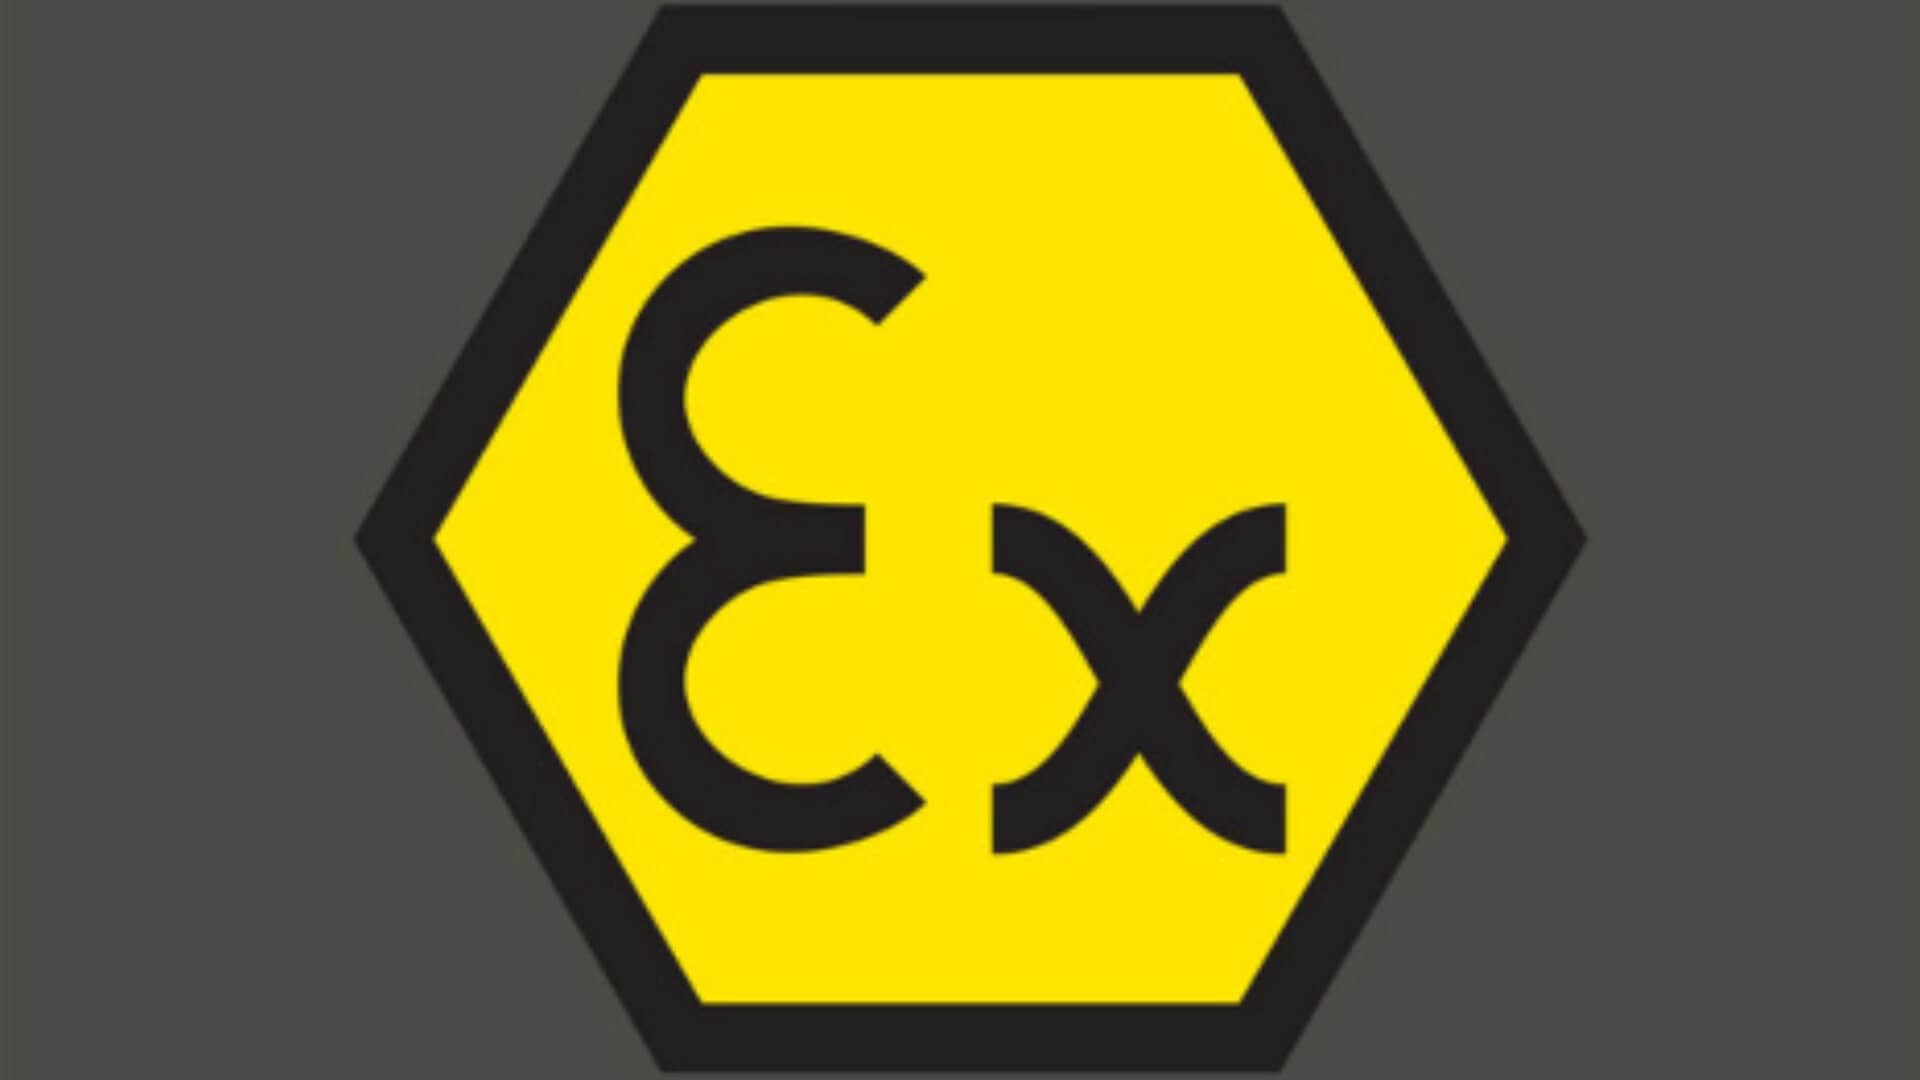 BX SERIES O2 and H2S ANALYZERS RECEIVE ATEX announced IECEx CERTIFICATIONS